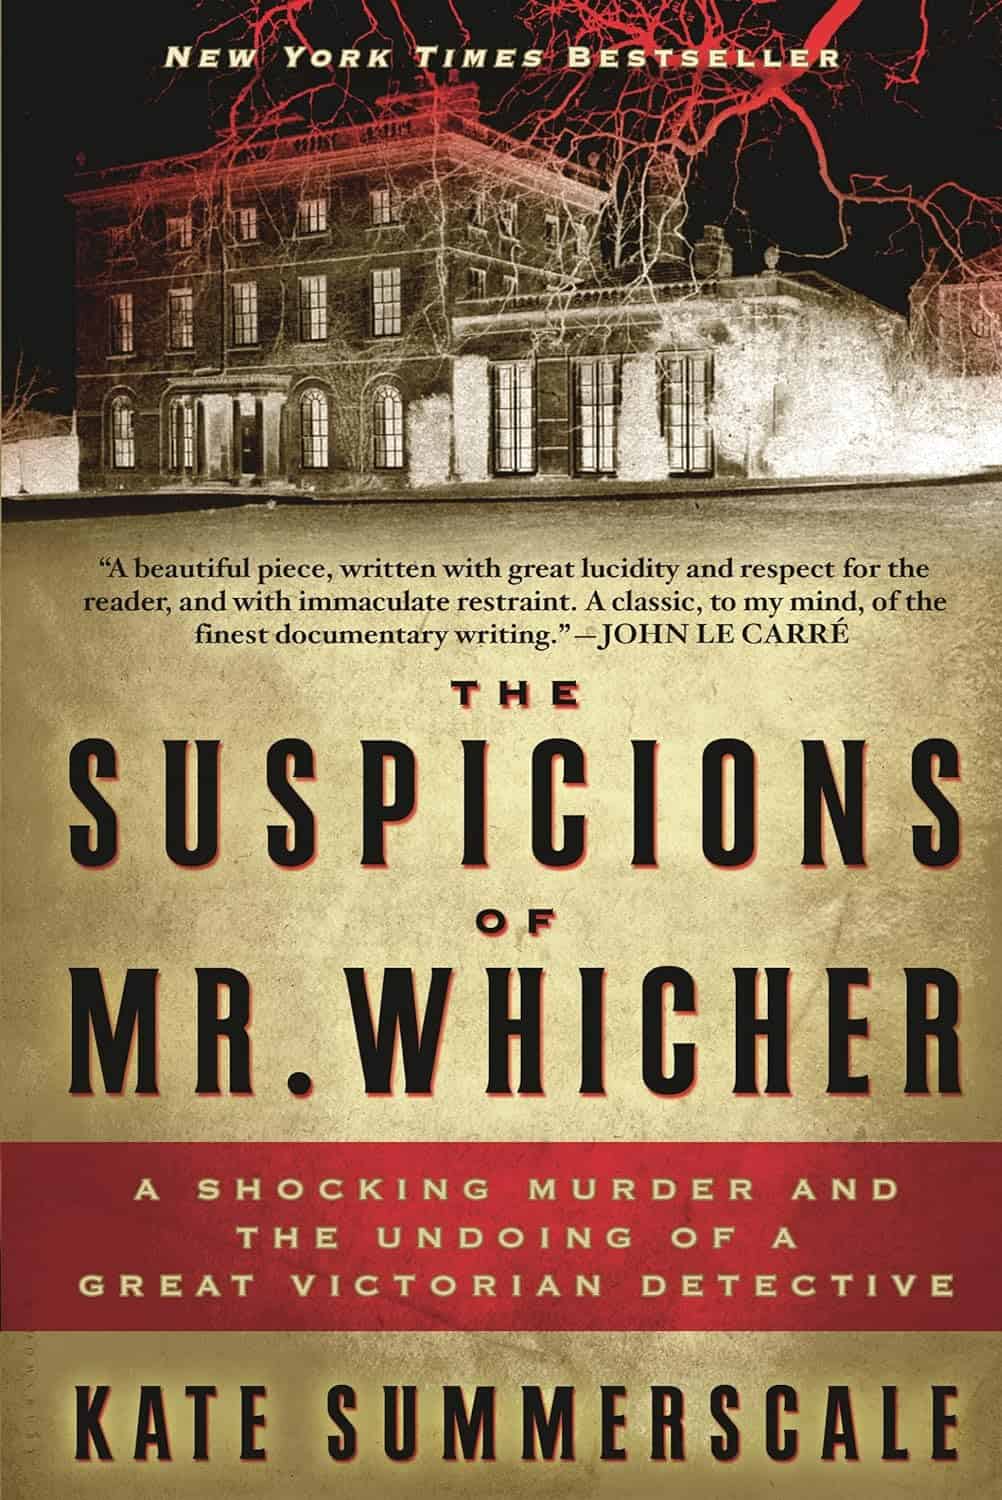 The Suspicions of Mr. Whicher: A Shocking Murder and the Undoing of a Great by Kate Summerscale